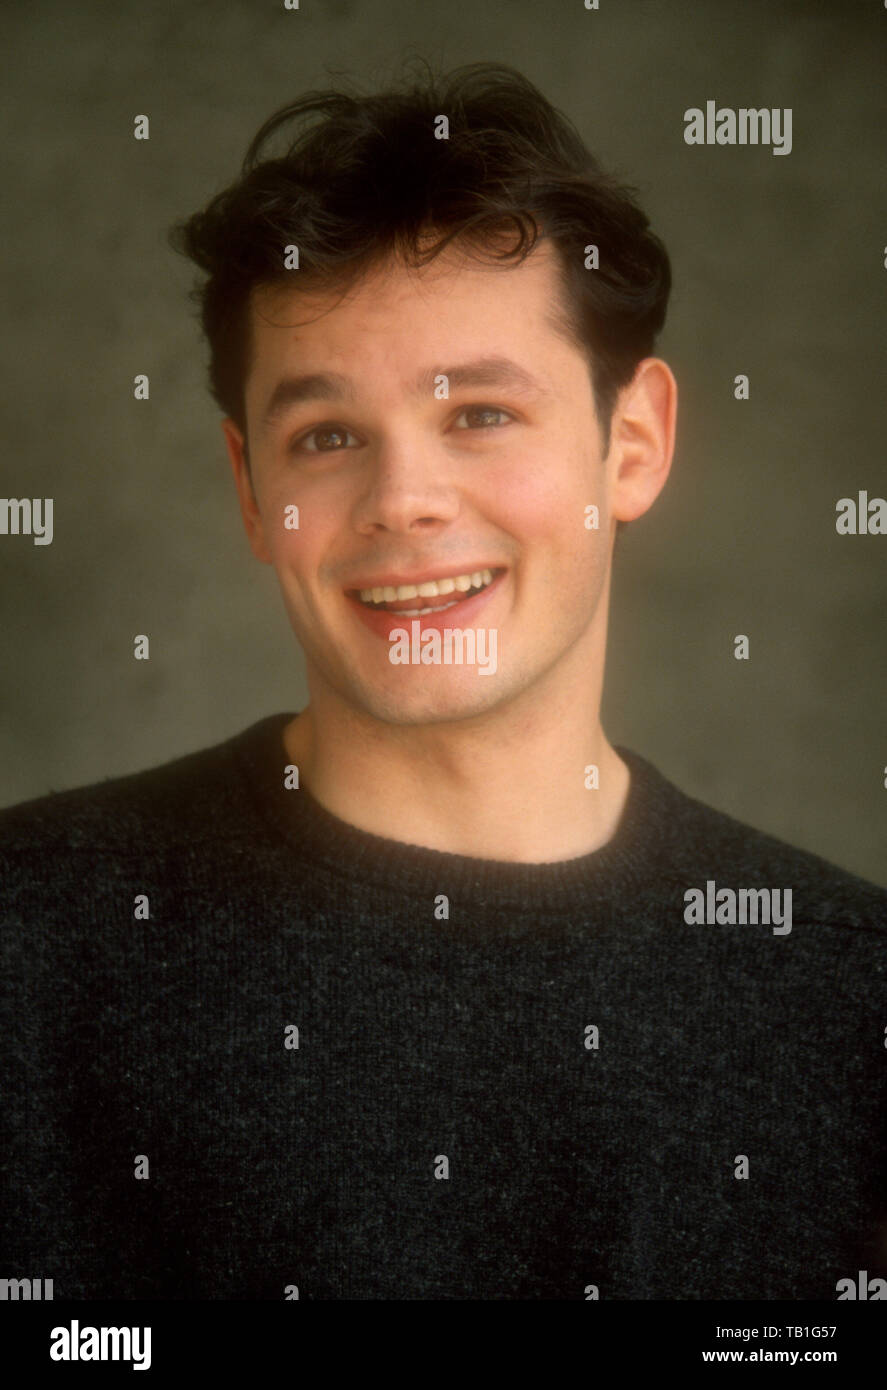 Los Angeles, California, USA 6th May 1994 (Exclusive) Actor Marco Hofschneider poses at a photo shoot on May 6, 1994 in Los Angeles, California, USA. Photo by Barry King/Alamy Stock Photo Stock Photo